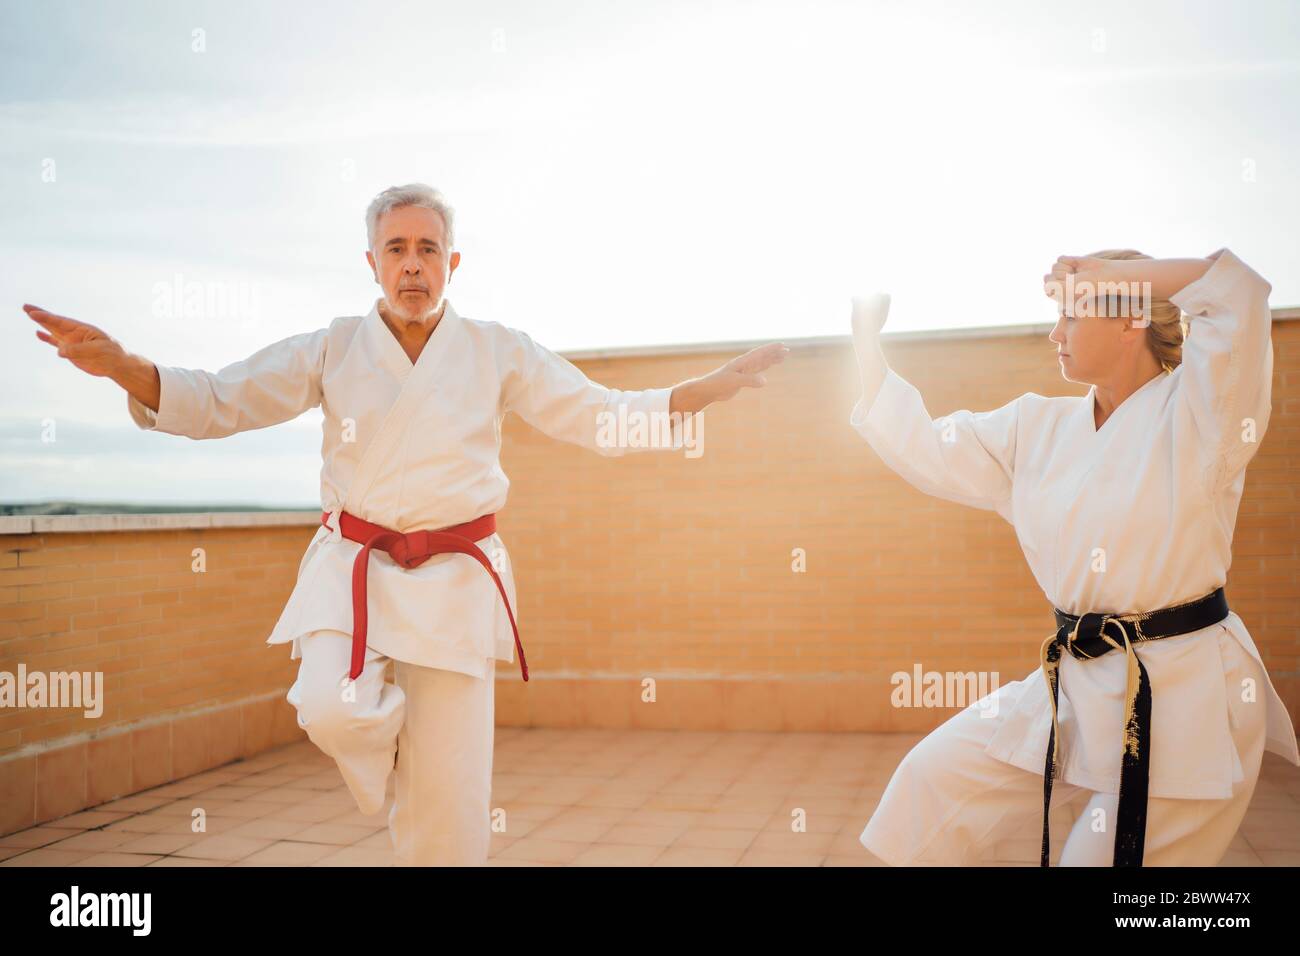 Woman with teacher during karate training on terrace Stock Photo